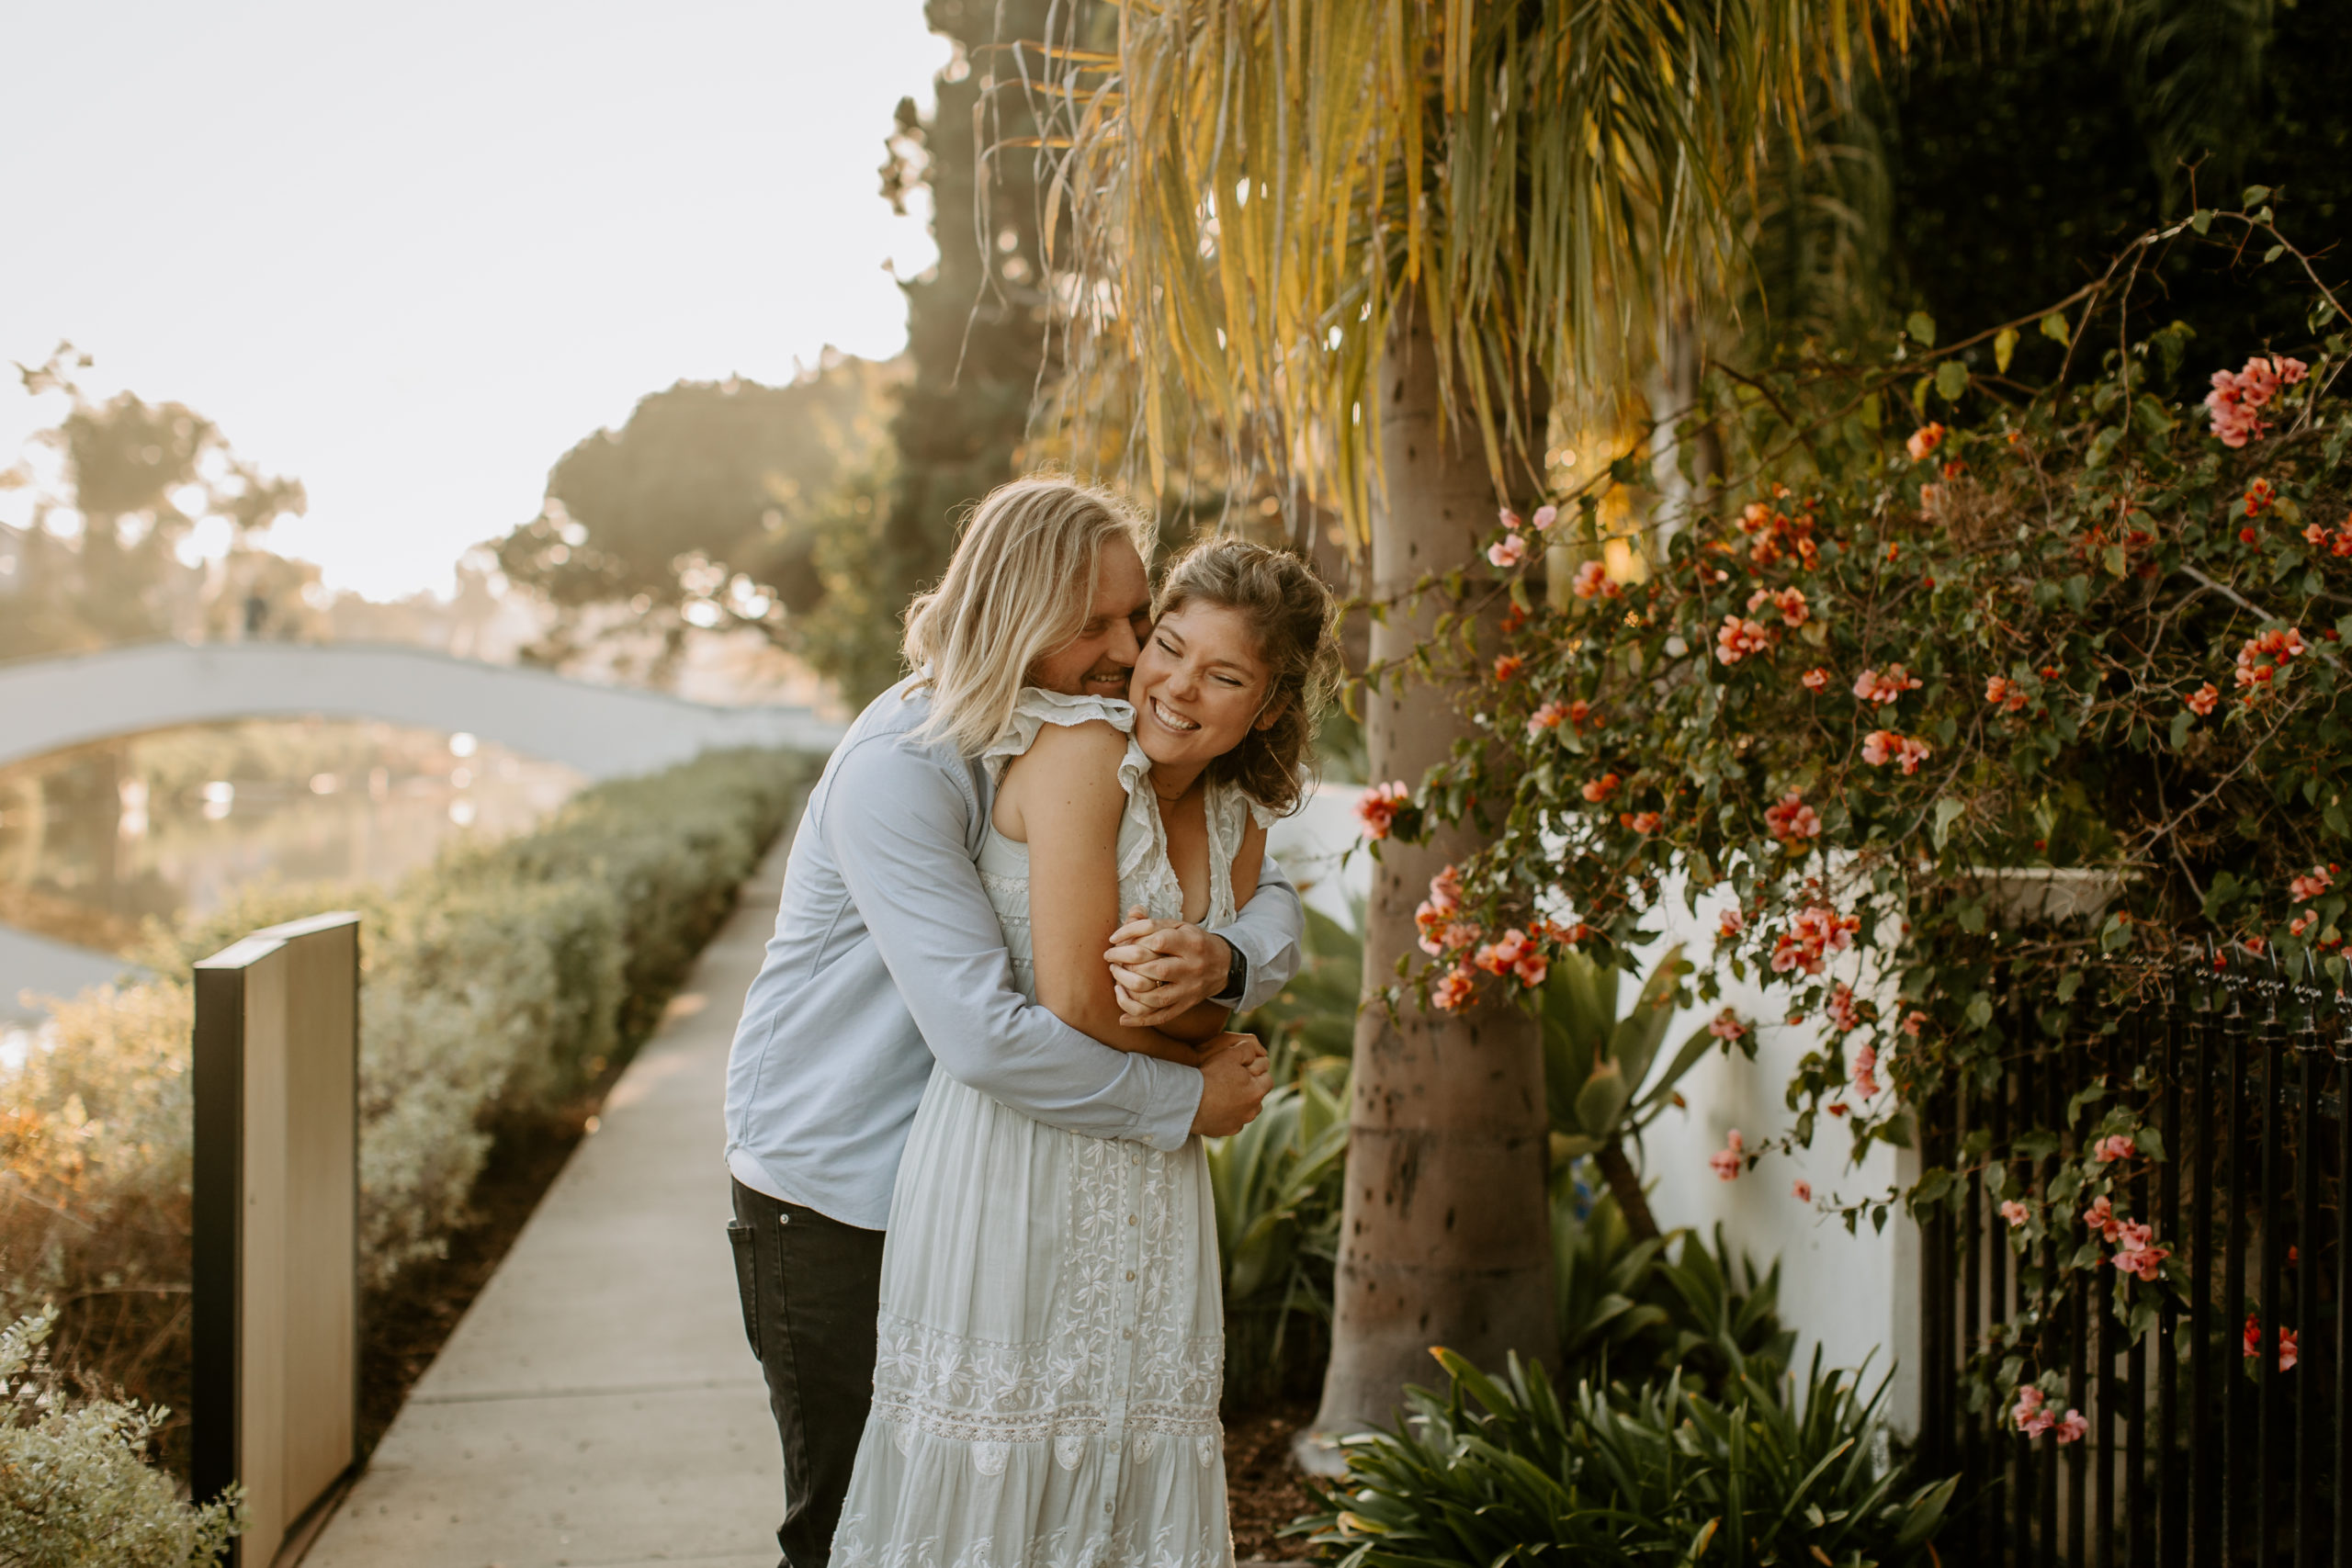 Venice Canals in Los Angeles engagement photos